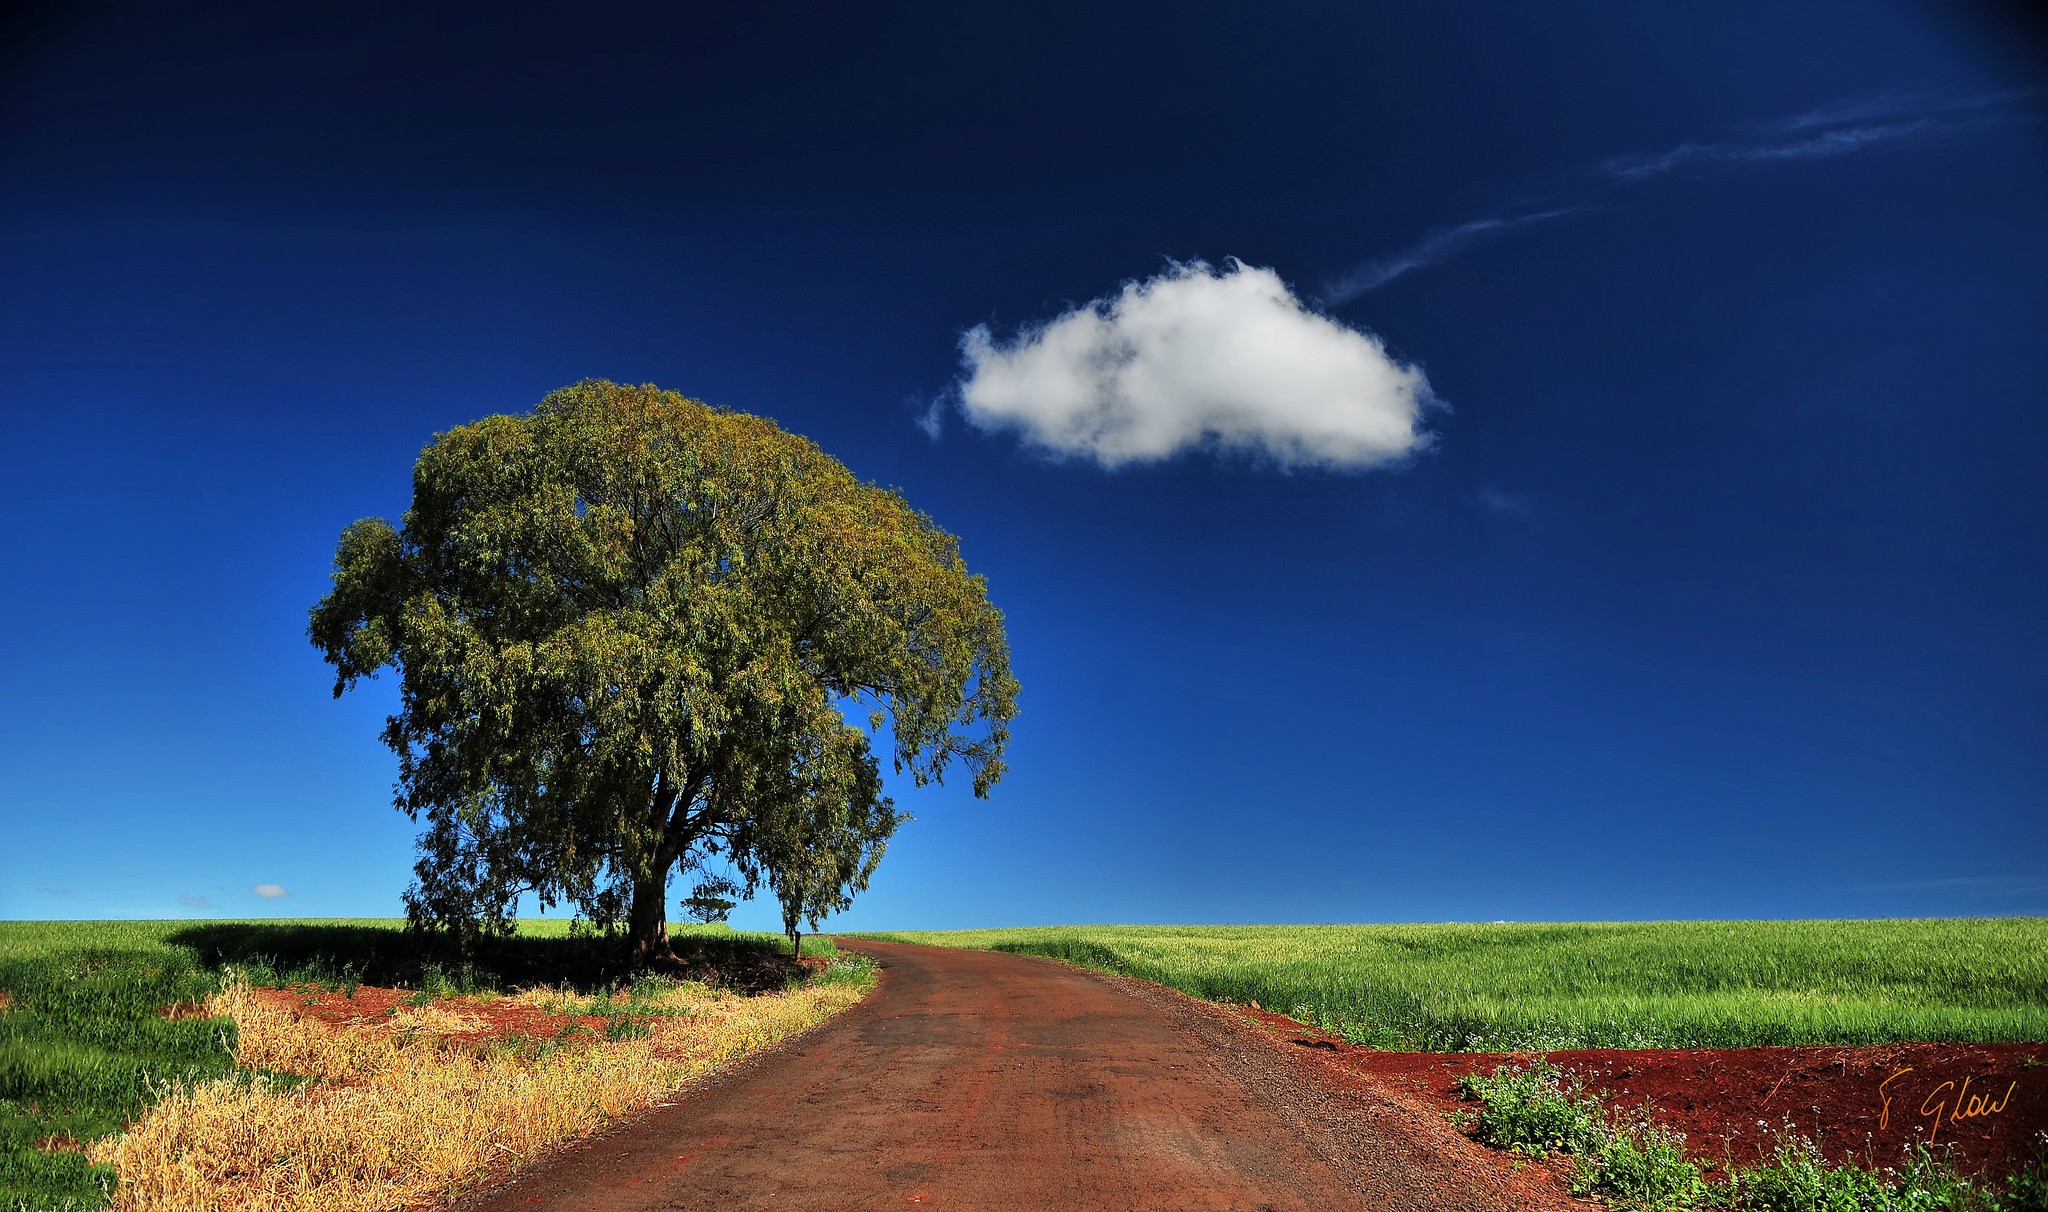 General 2048x1212 clouds landscape field trees road dirt road sky outdoors